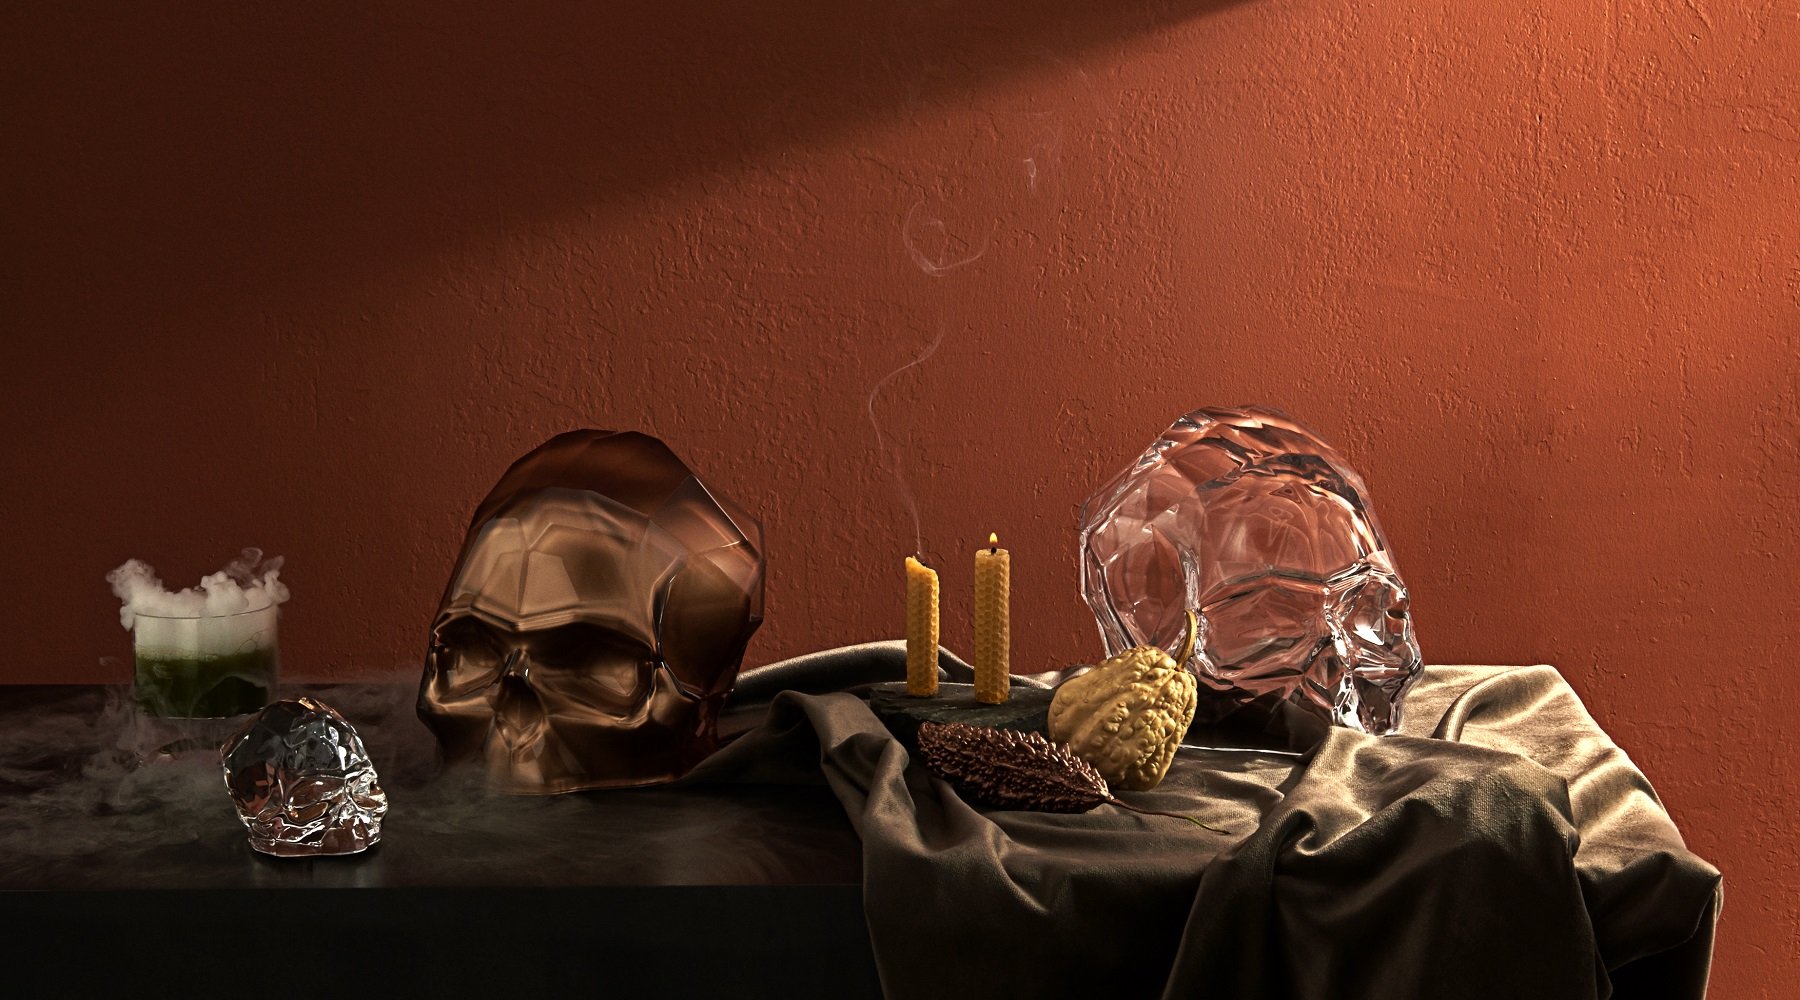 The NUDE Memento Mori Skull collection presented in a gloomy setting. The large skull is in clear and copper, and in the front the small skull with copper bottom is shown.